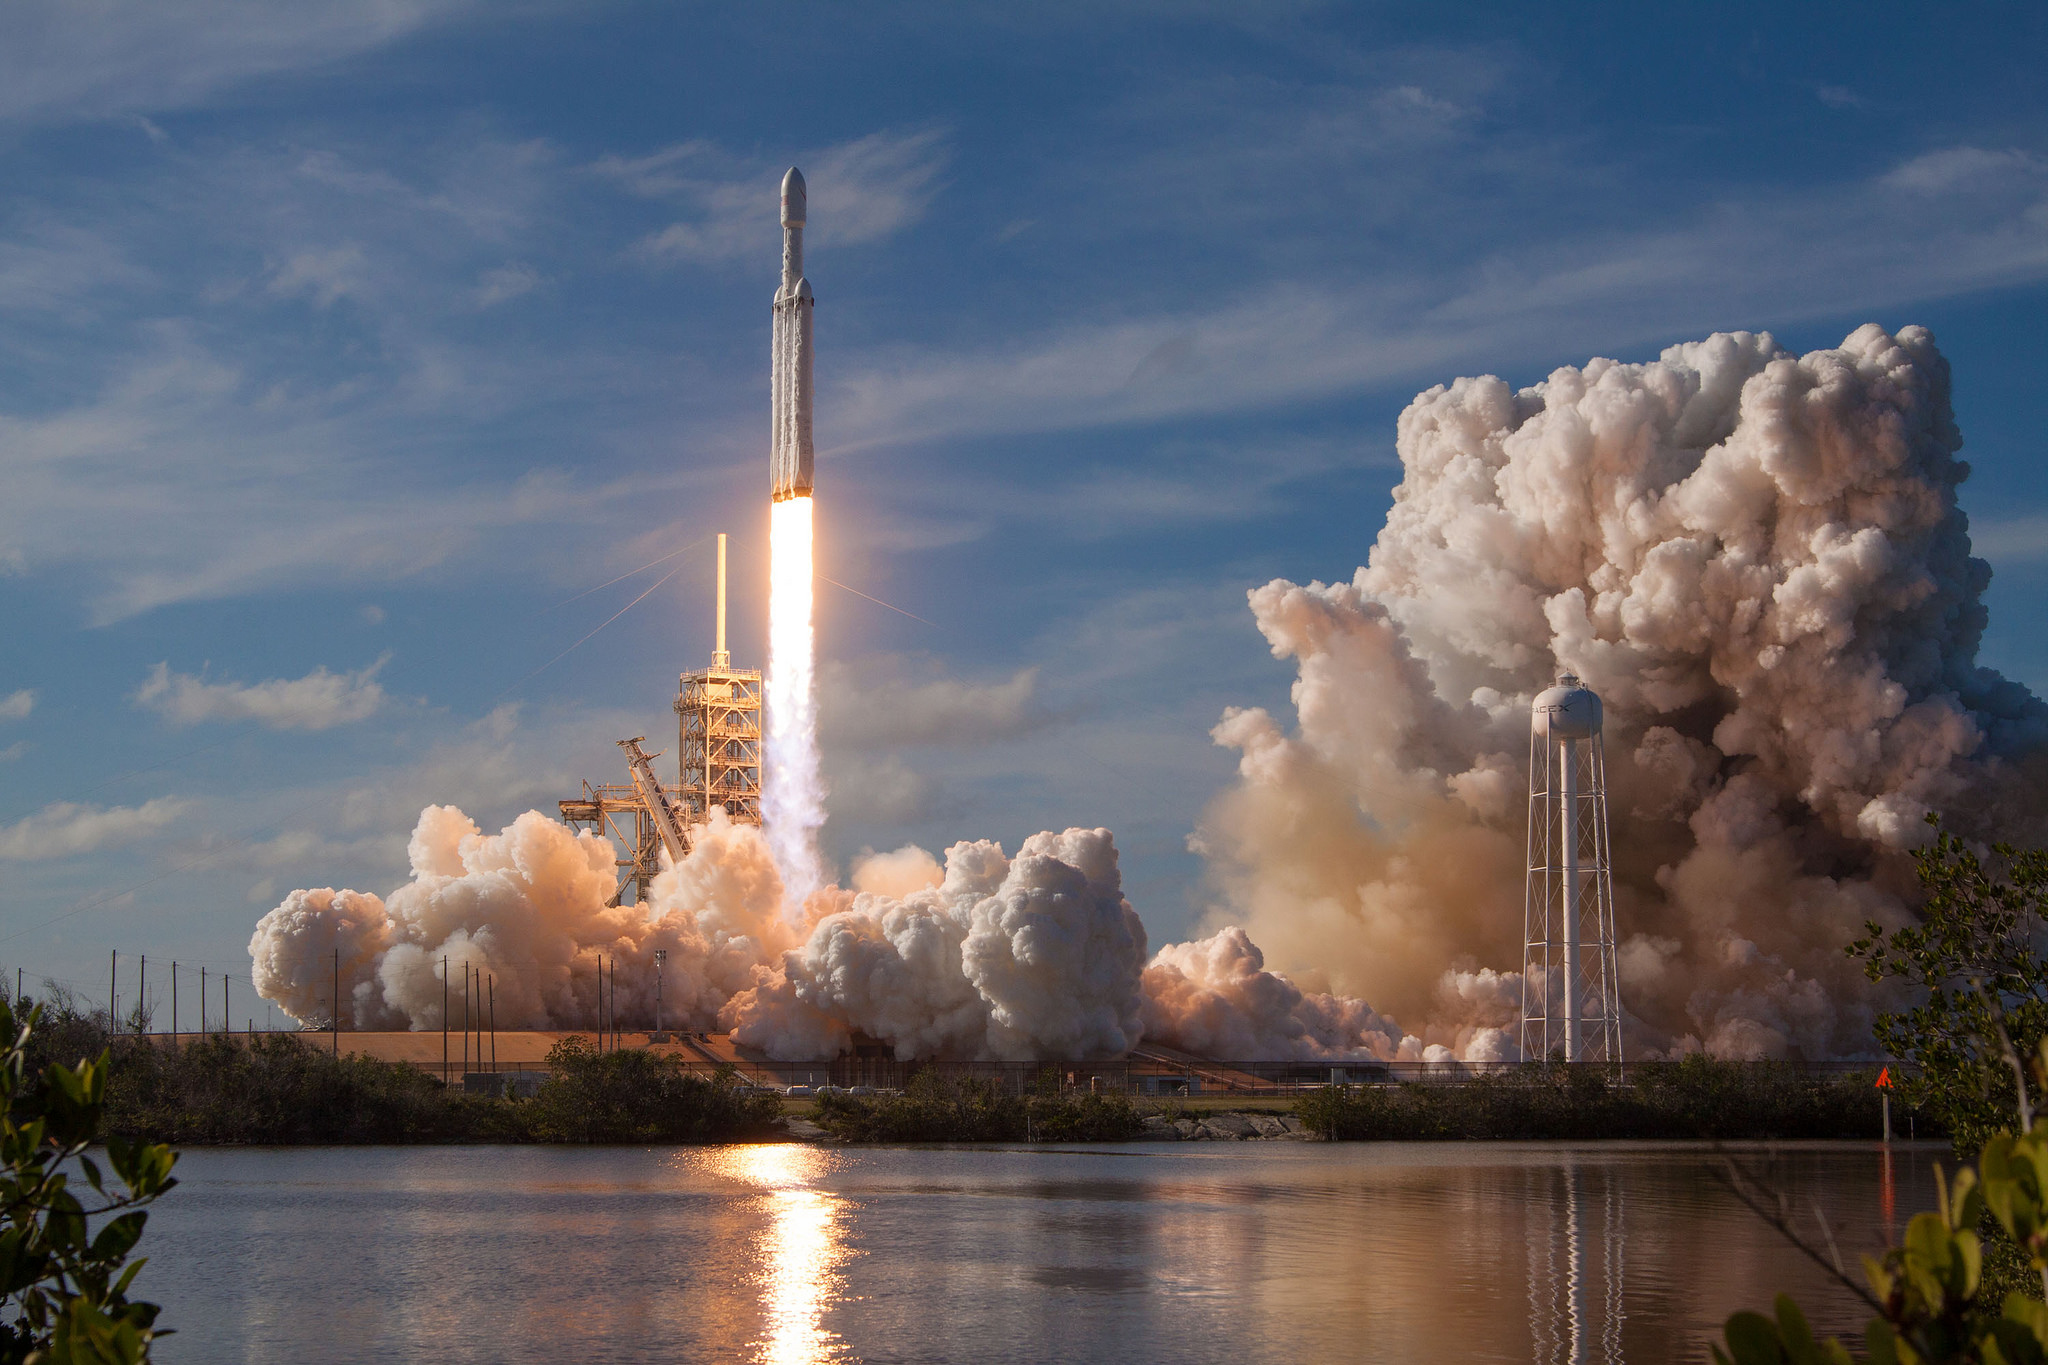 SpaceX's Next Falcon Heavy Rocket Launch Will Be an Epic Rideshare